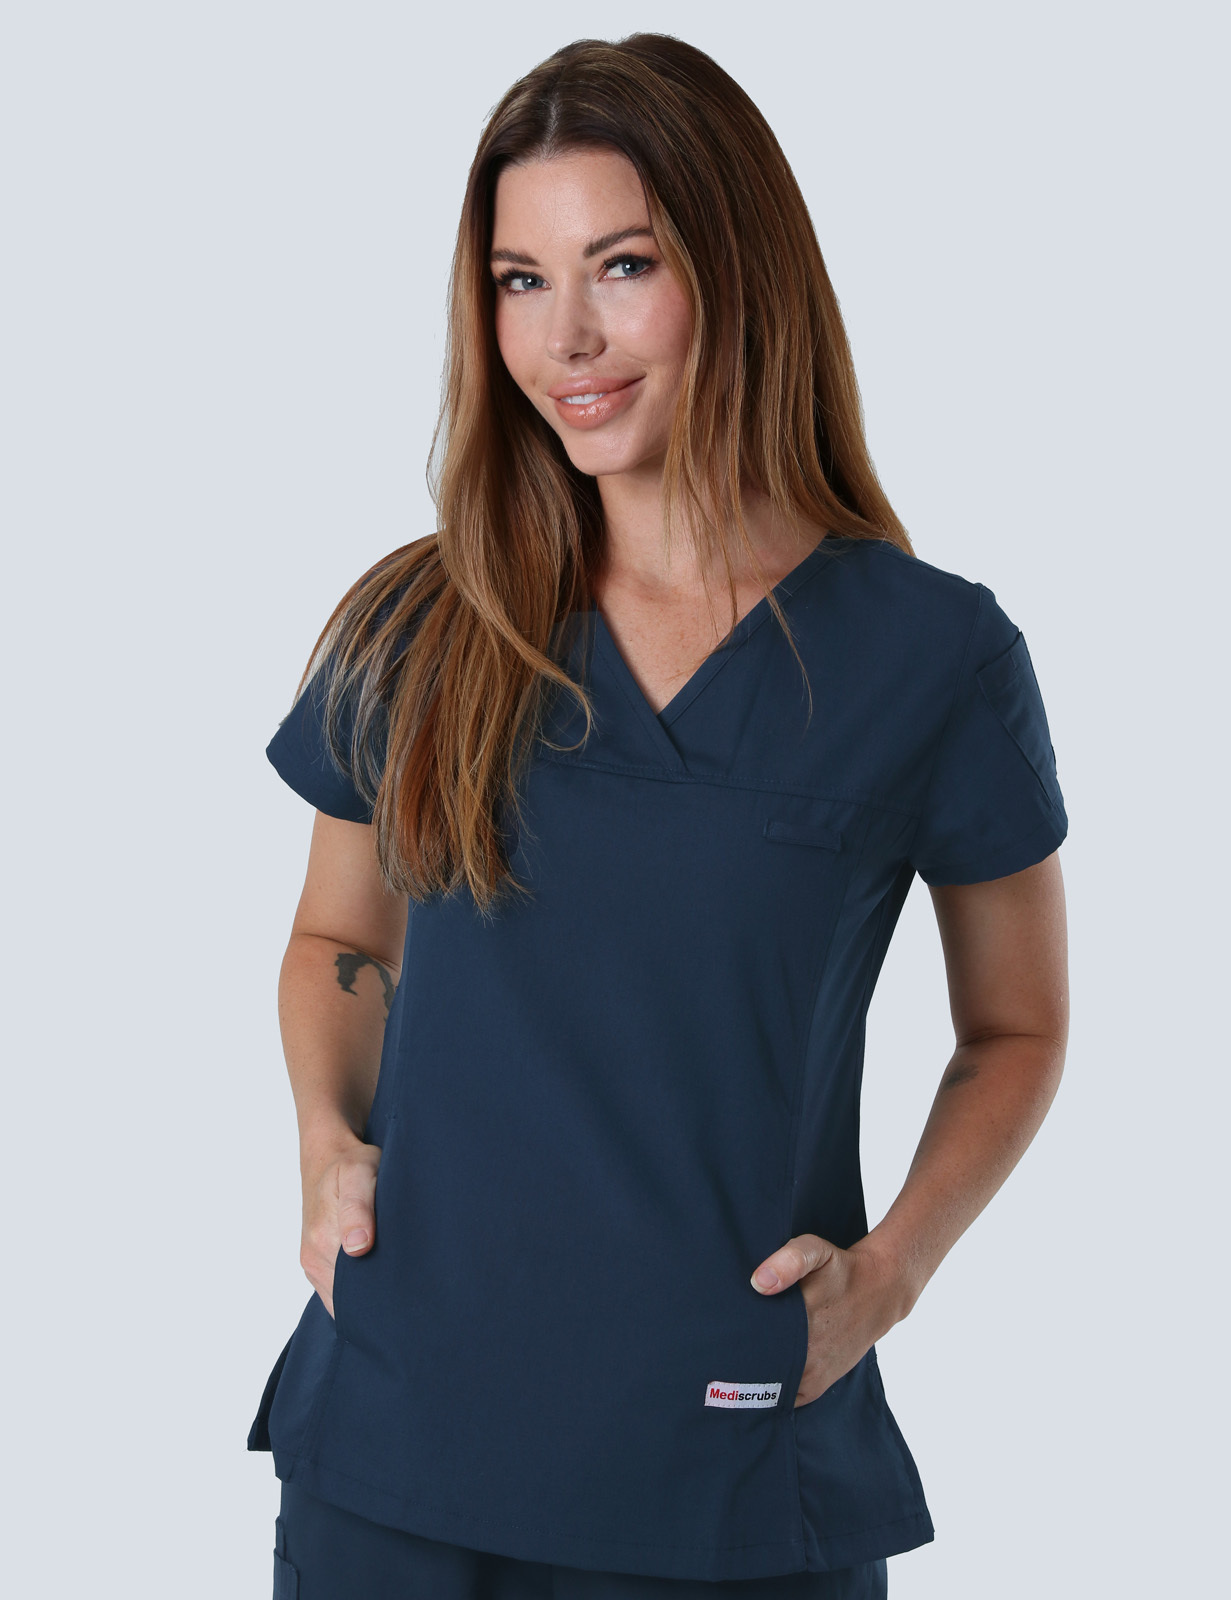 Melbourne Hospital - Wards CN (Women's Fit Solid Scrub Top and Cargo Pants in Navy incl Logos)